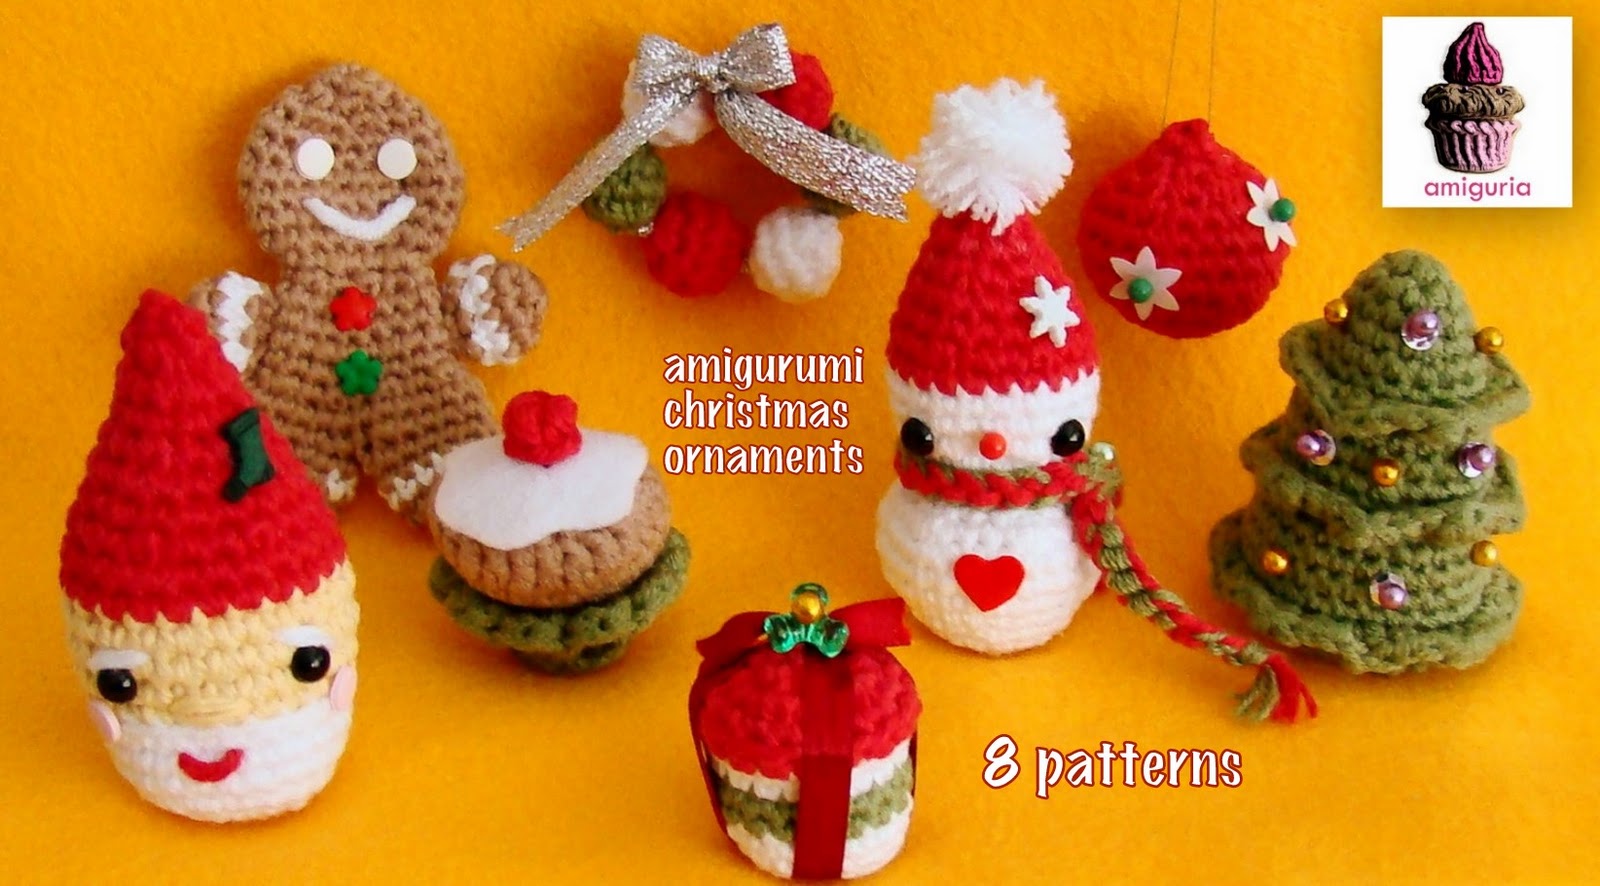 Free Crochet Patterns for Christmas Stockings - Yahoo! Voices